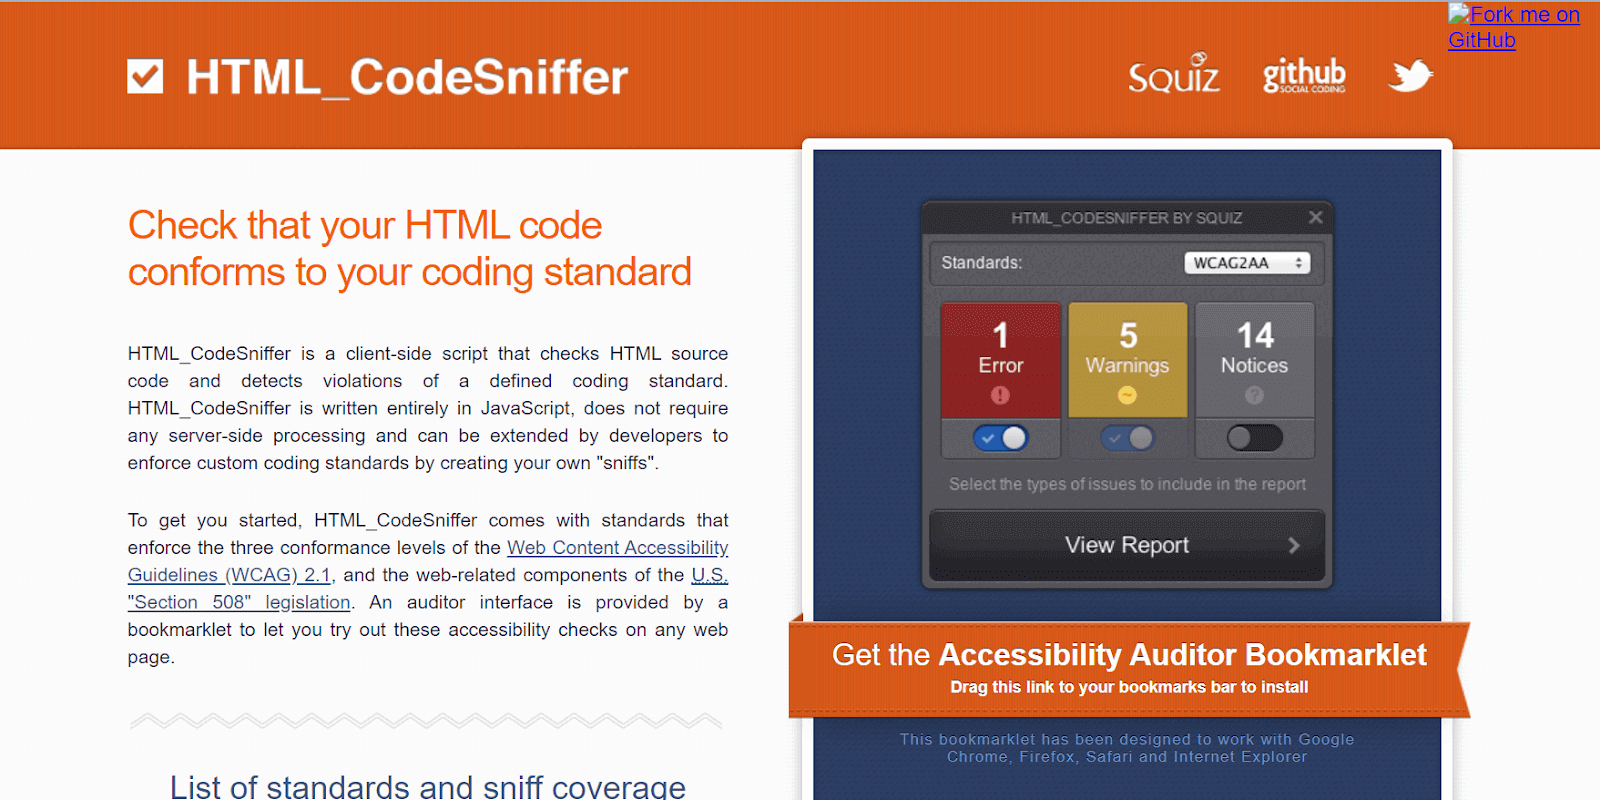 HTML CodeSniffer